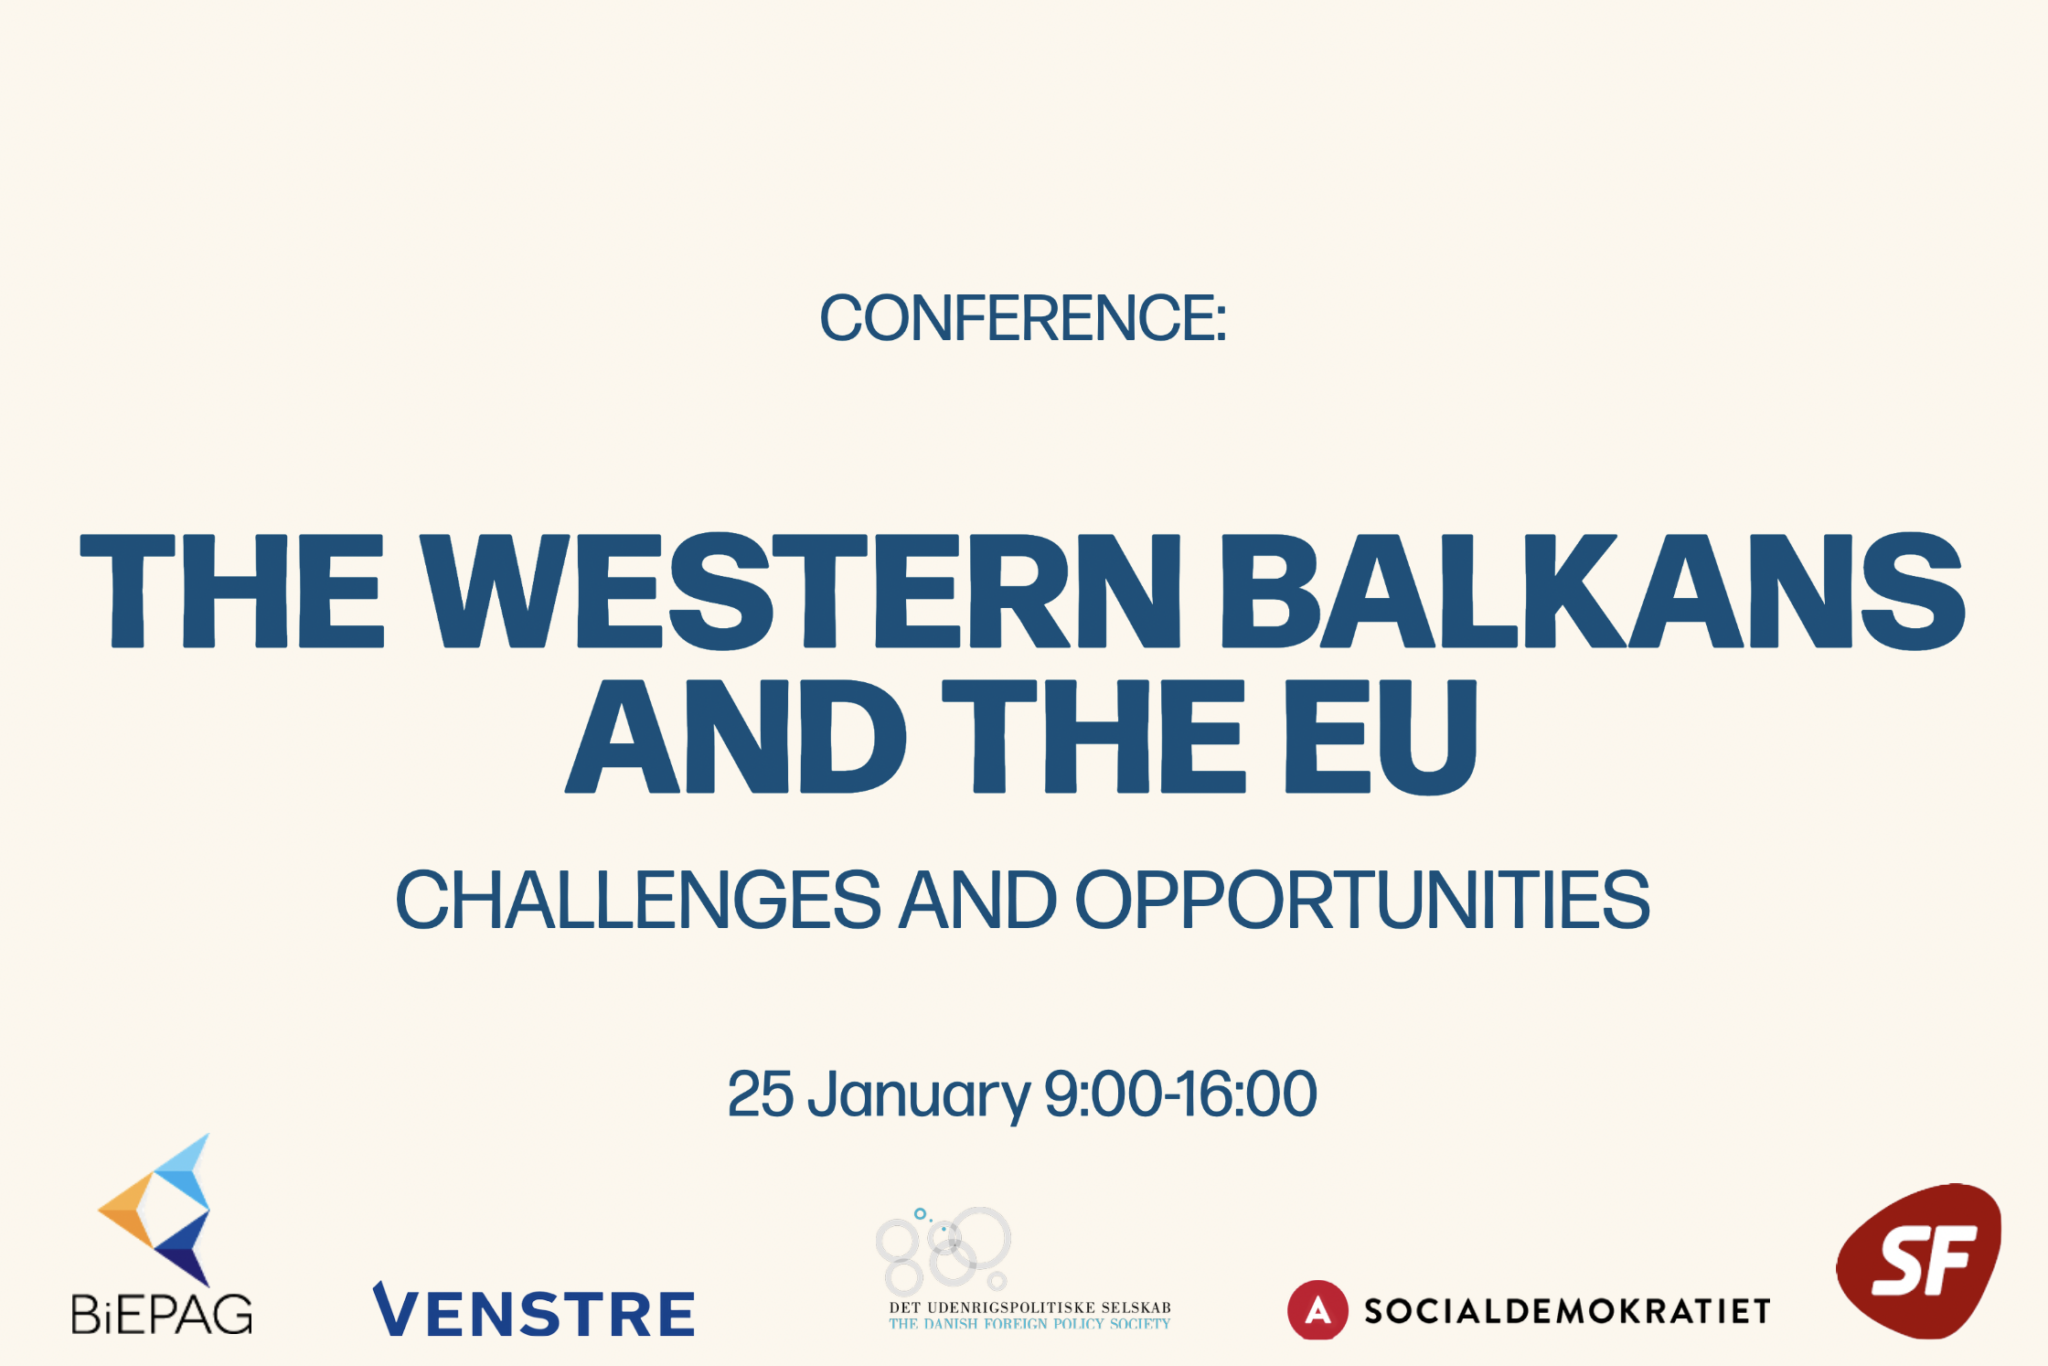 Upcoming event - Western Balkans and EU: Challenges and Opportunities, January 25th, 2023